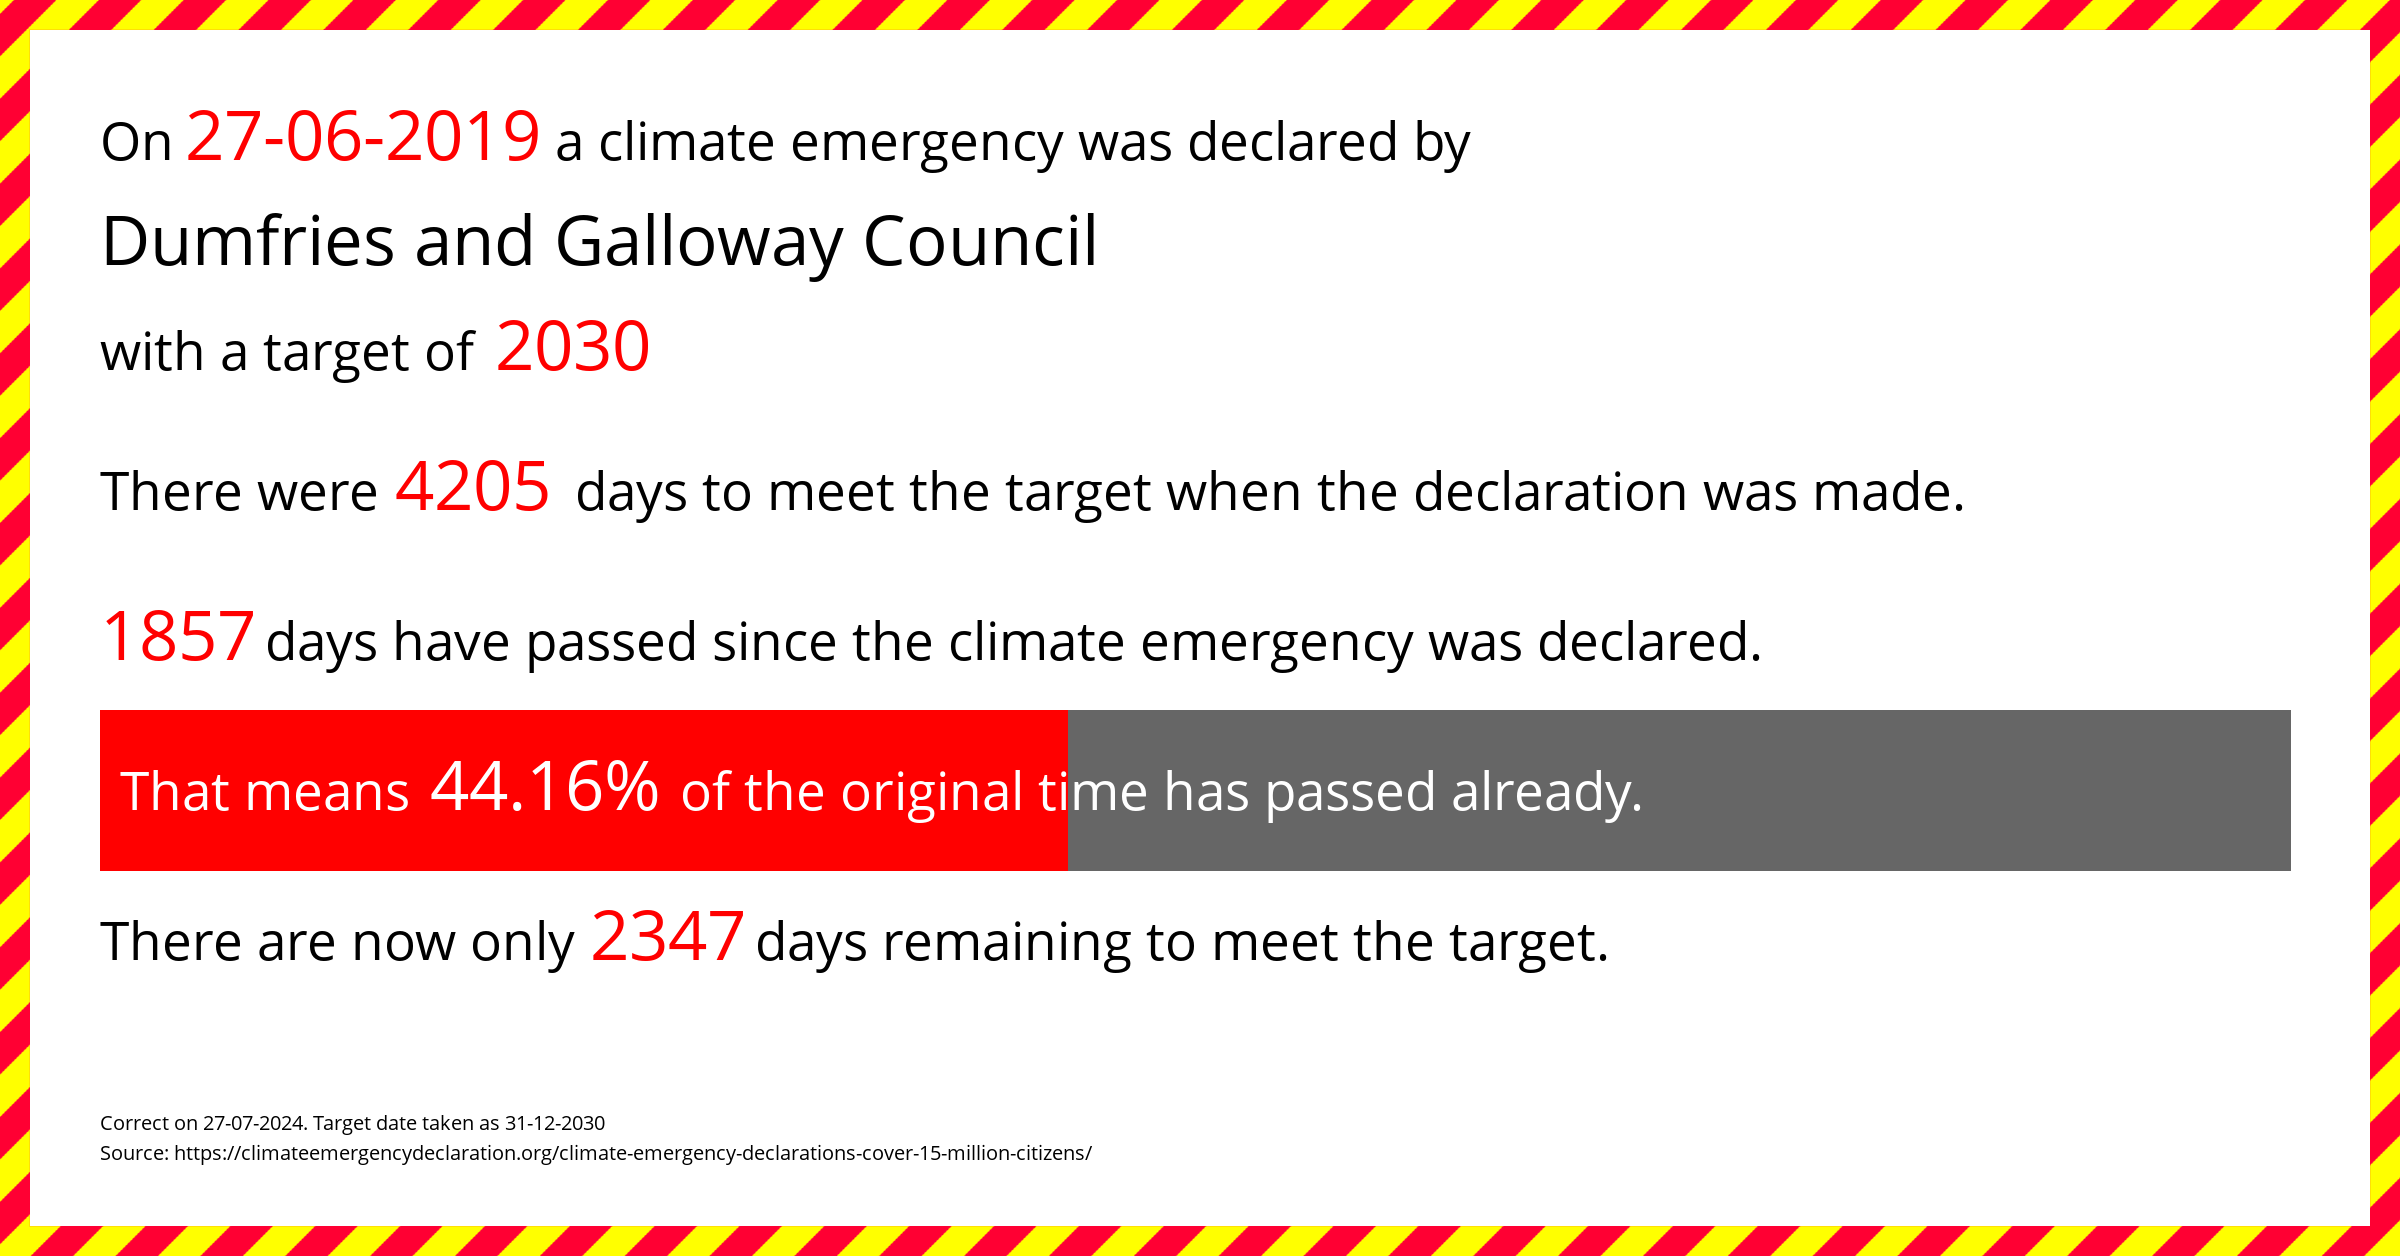 Dumfries and Galloway Council declared a Climate emergency on Thursday 27th June 2019, with a target of 2030.